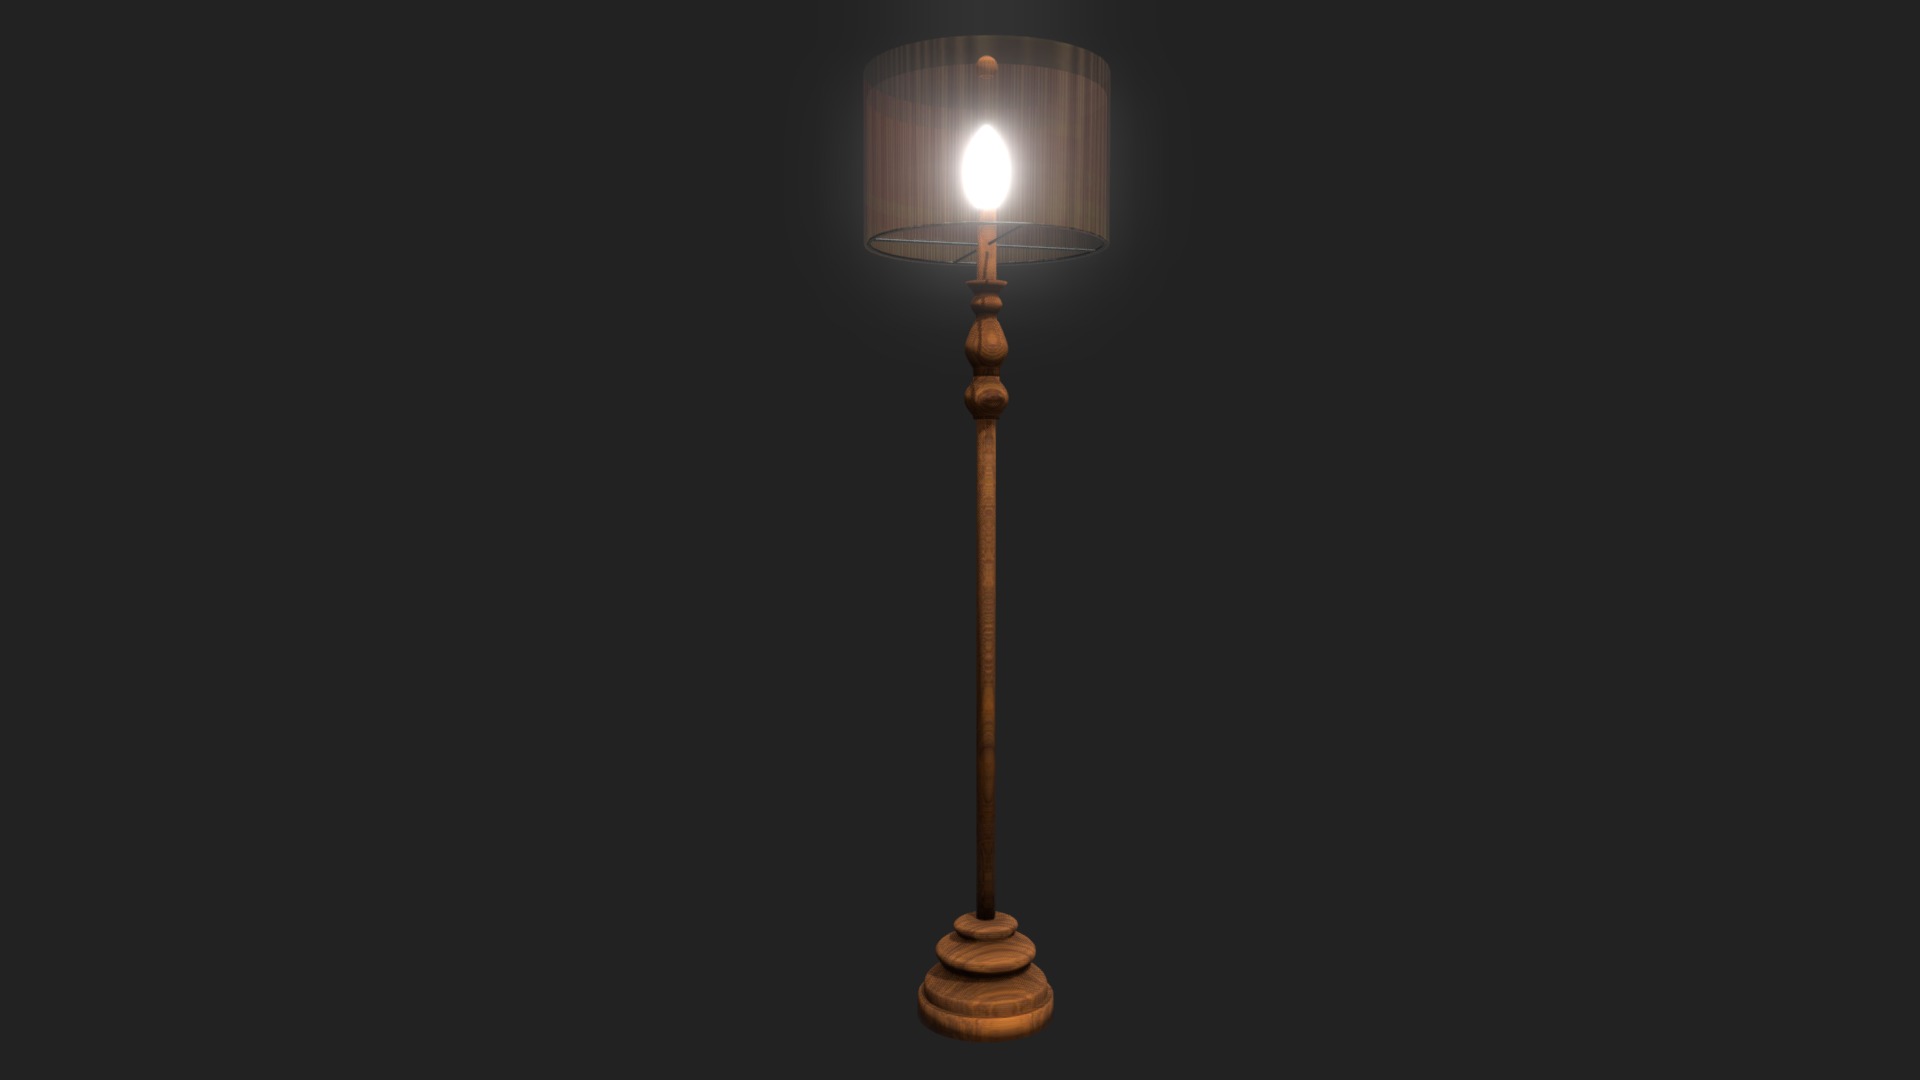 3D model HGPL-05 - This is a 3D model of the HGPL-05. The 3D model is about a lamp post with a light on top.